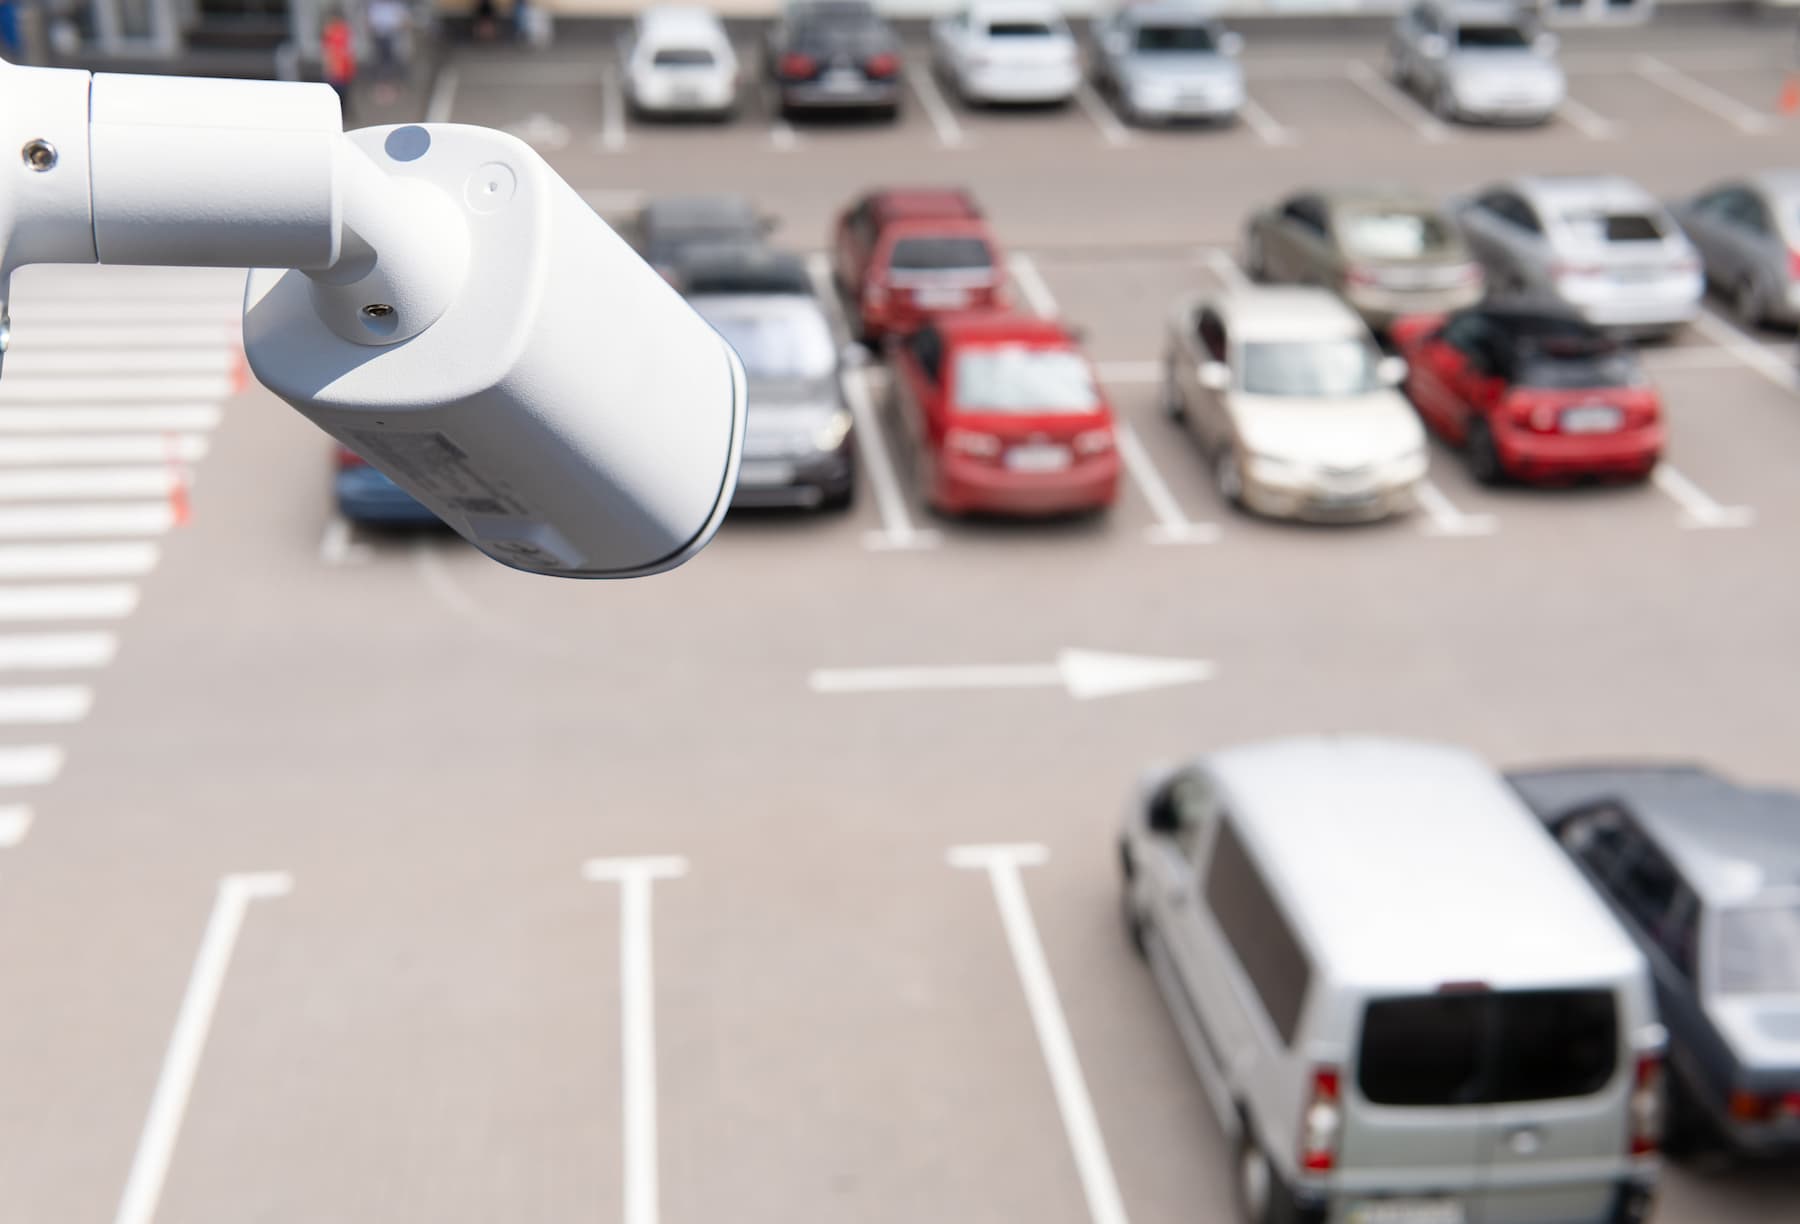 AI applied to occupancy detection in intelligent car parks